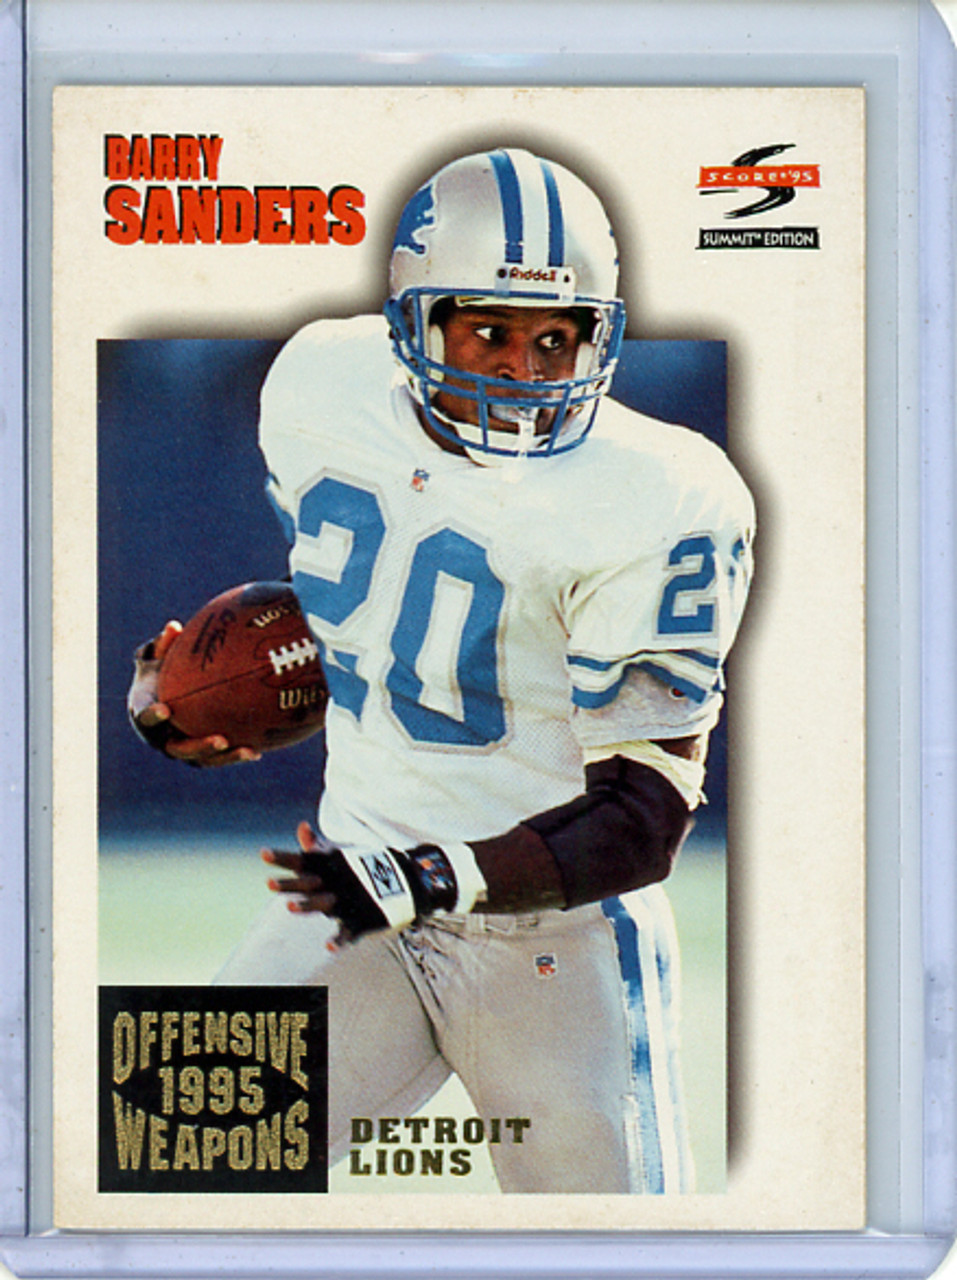 Barry Sanders 1995 Summit #180 Offensive Weapons (CQ)